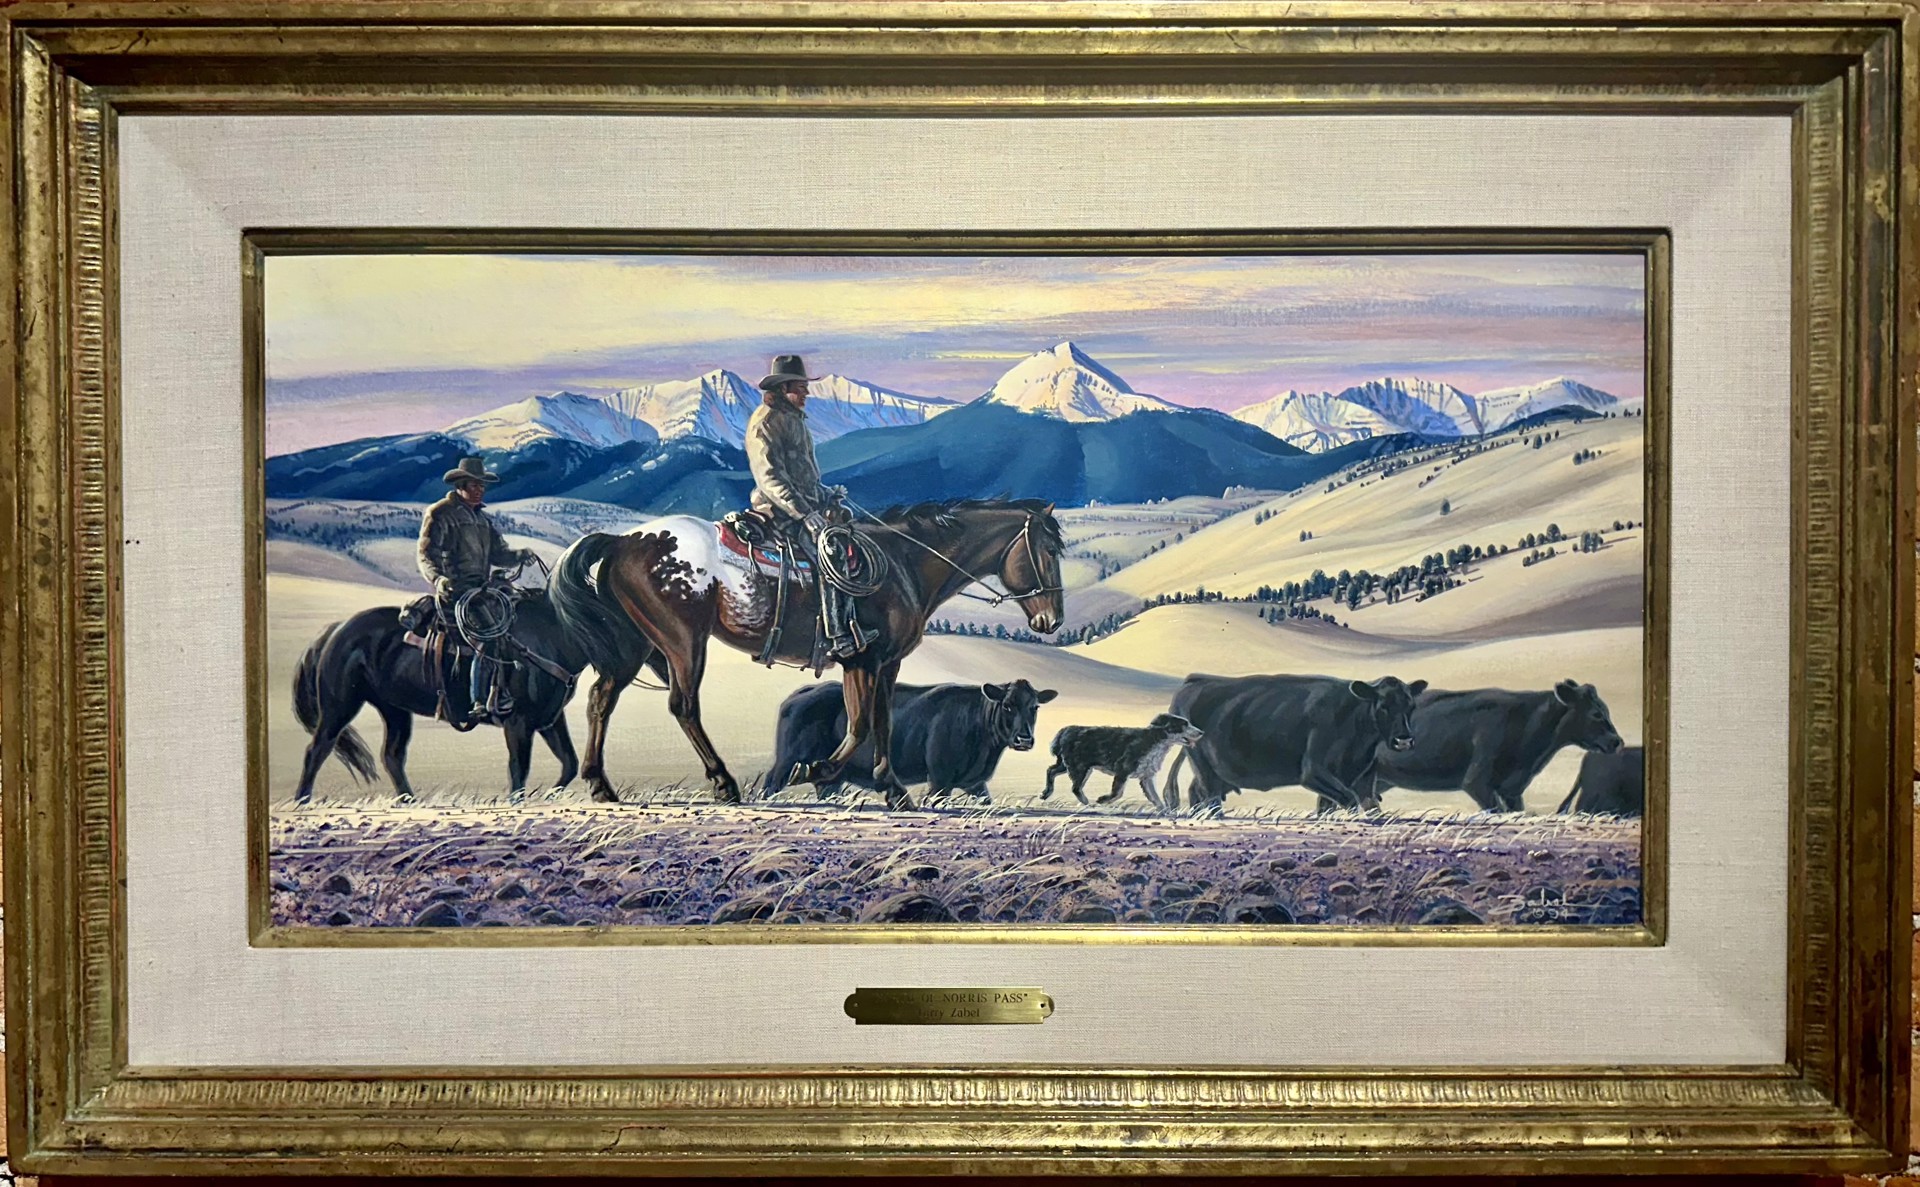 NORTH OF NORRIS PASS by Larry Zabel [1930-2012]